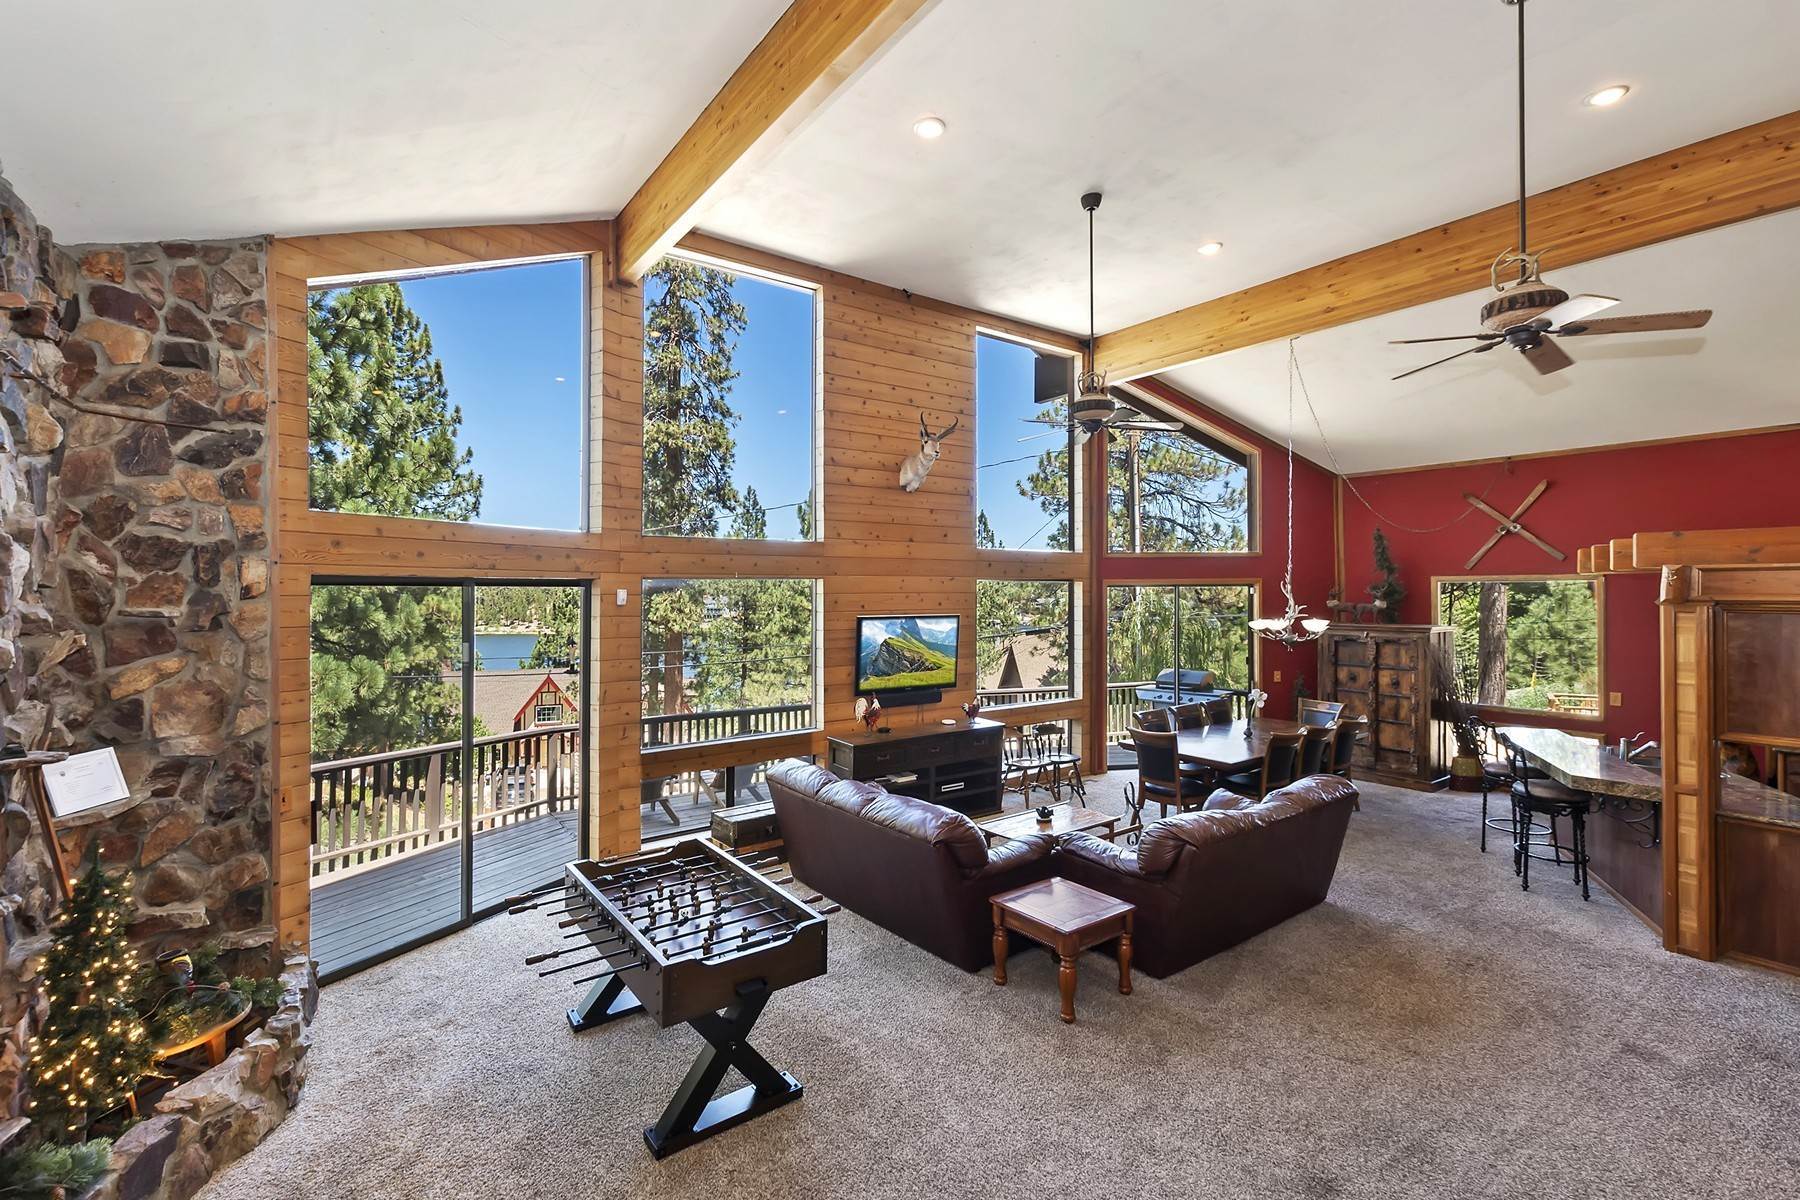 Single Family Homes for Sale at 786 Cove Drive, Big Bear Lake, CA 92315 786 Cove Drive Big Bear Lake, California 92315 United States